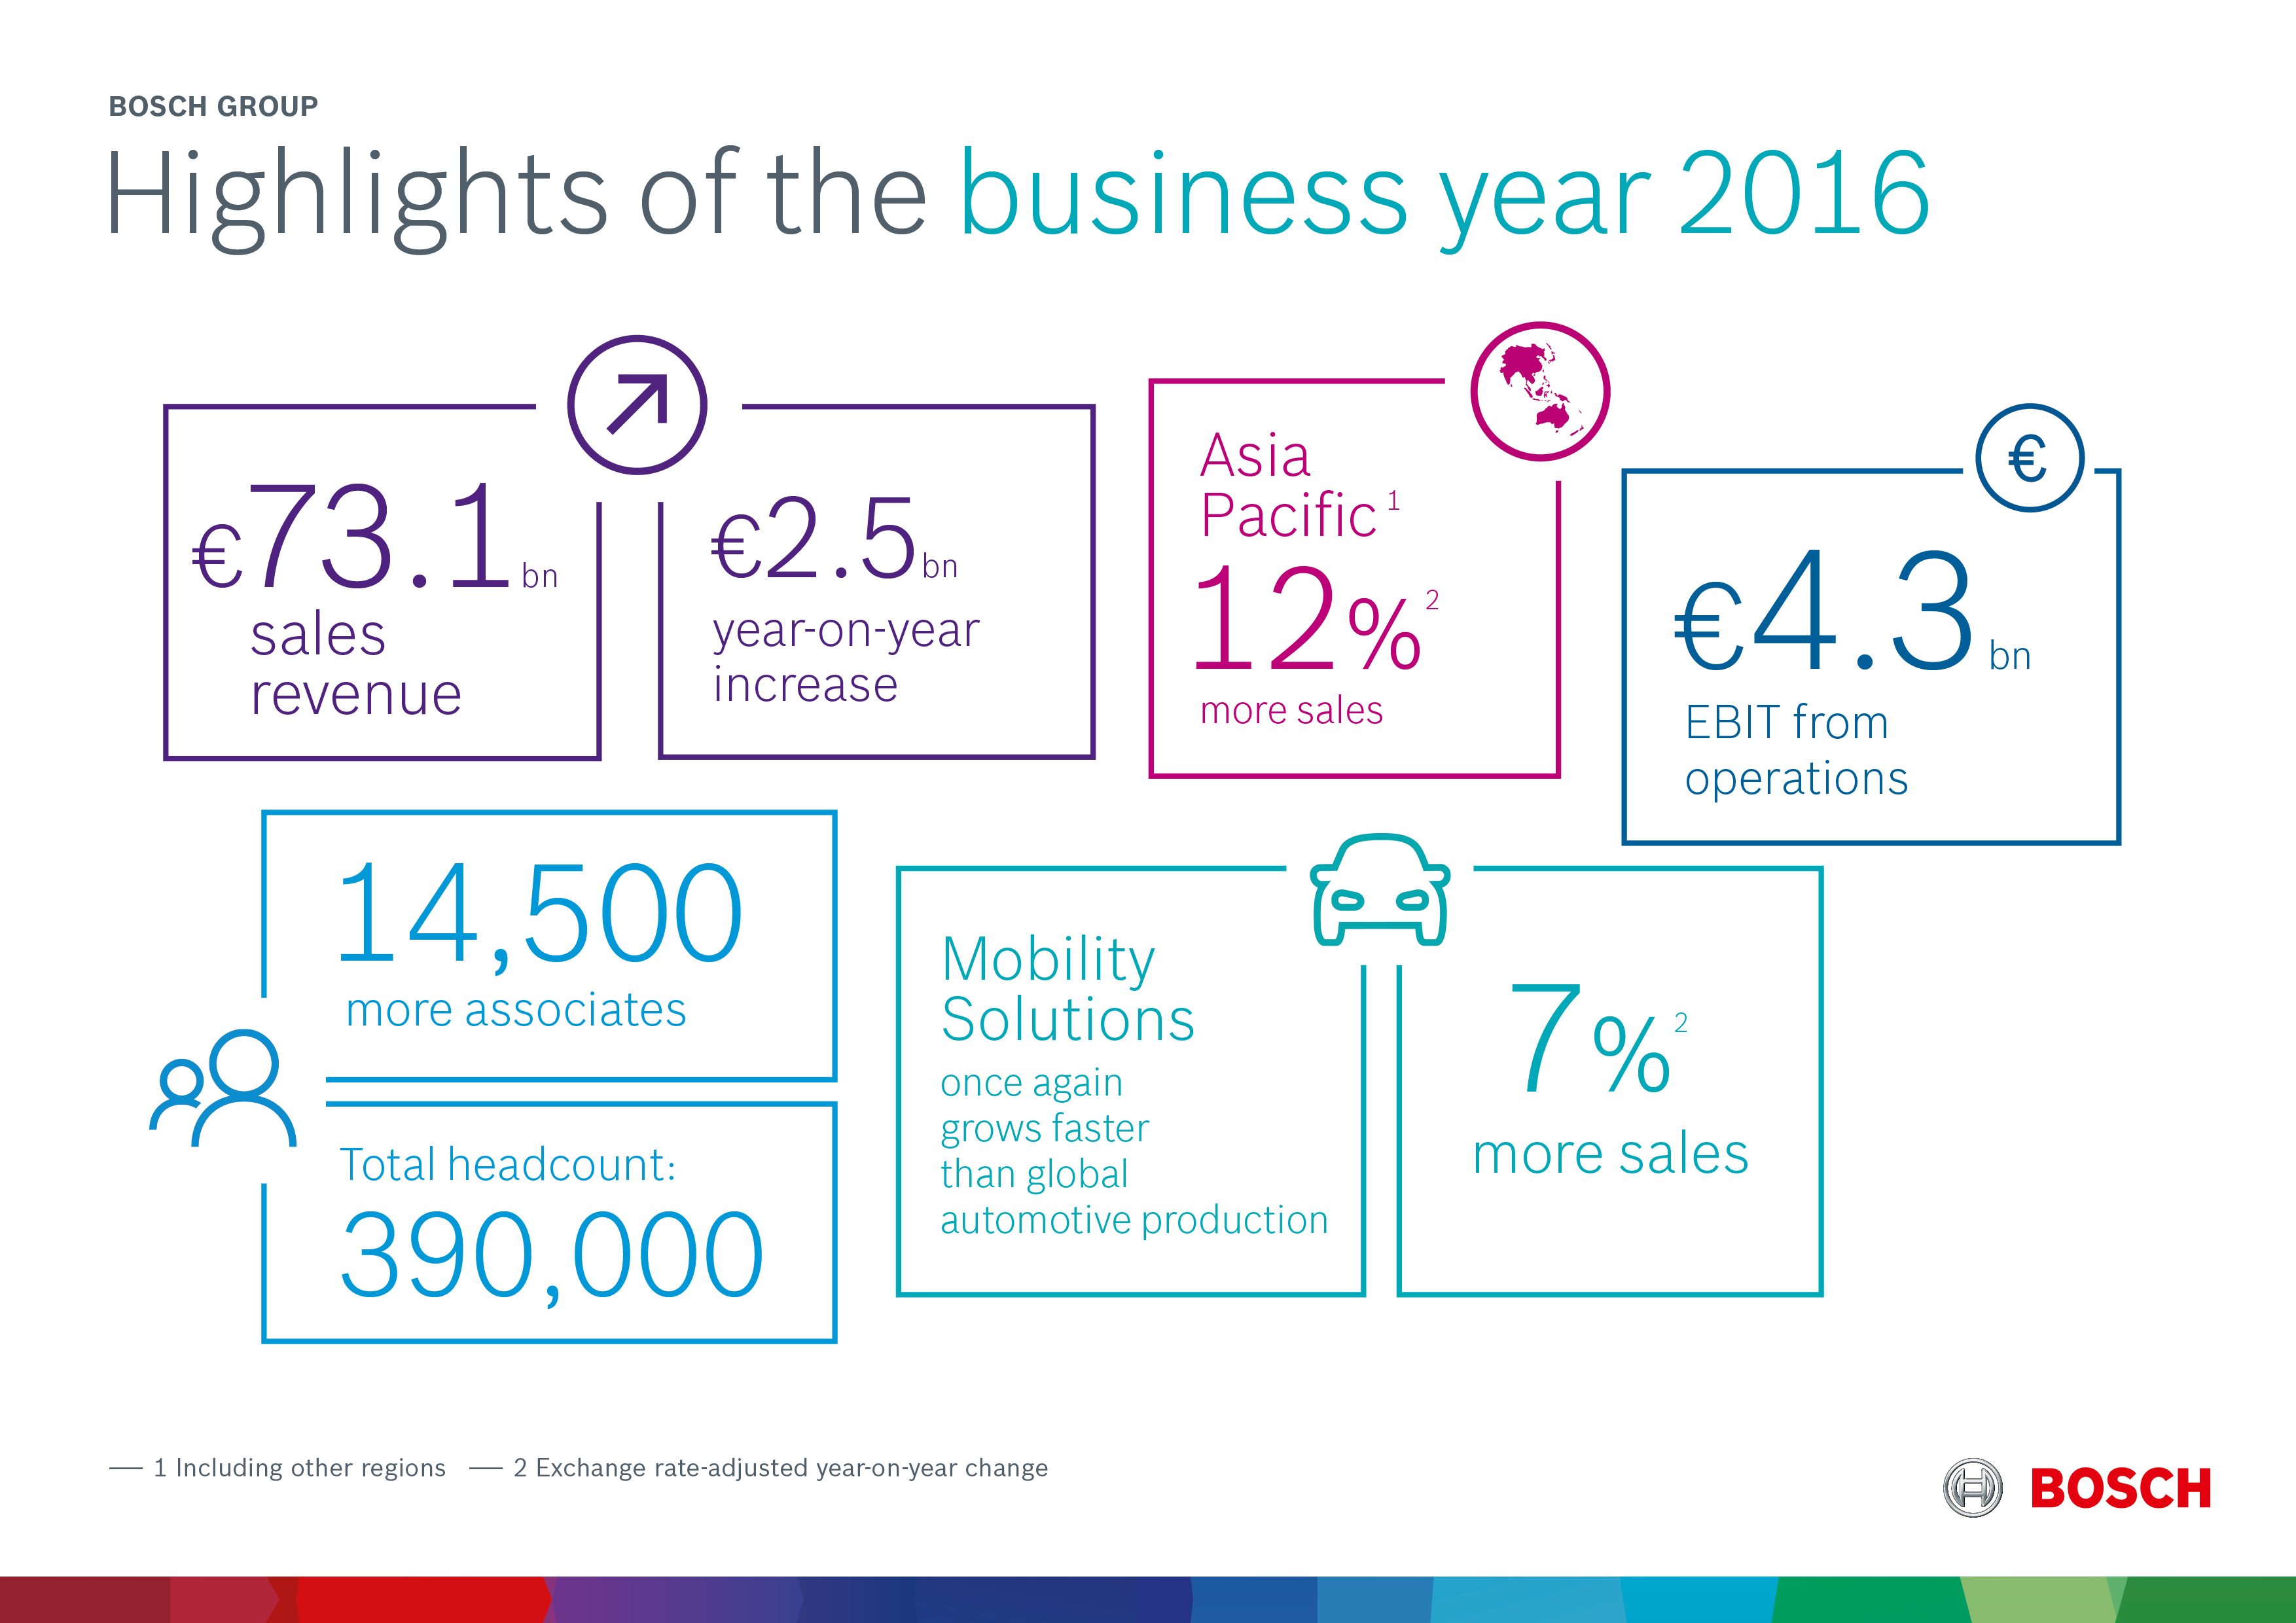 Highlights of the 2016 business year